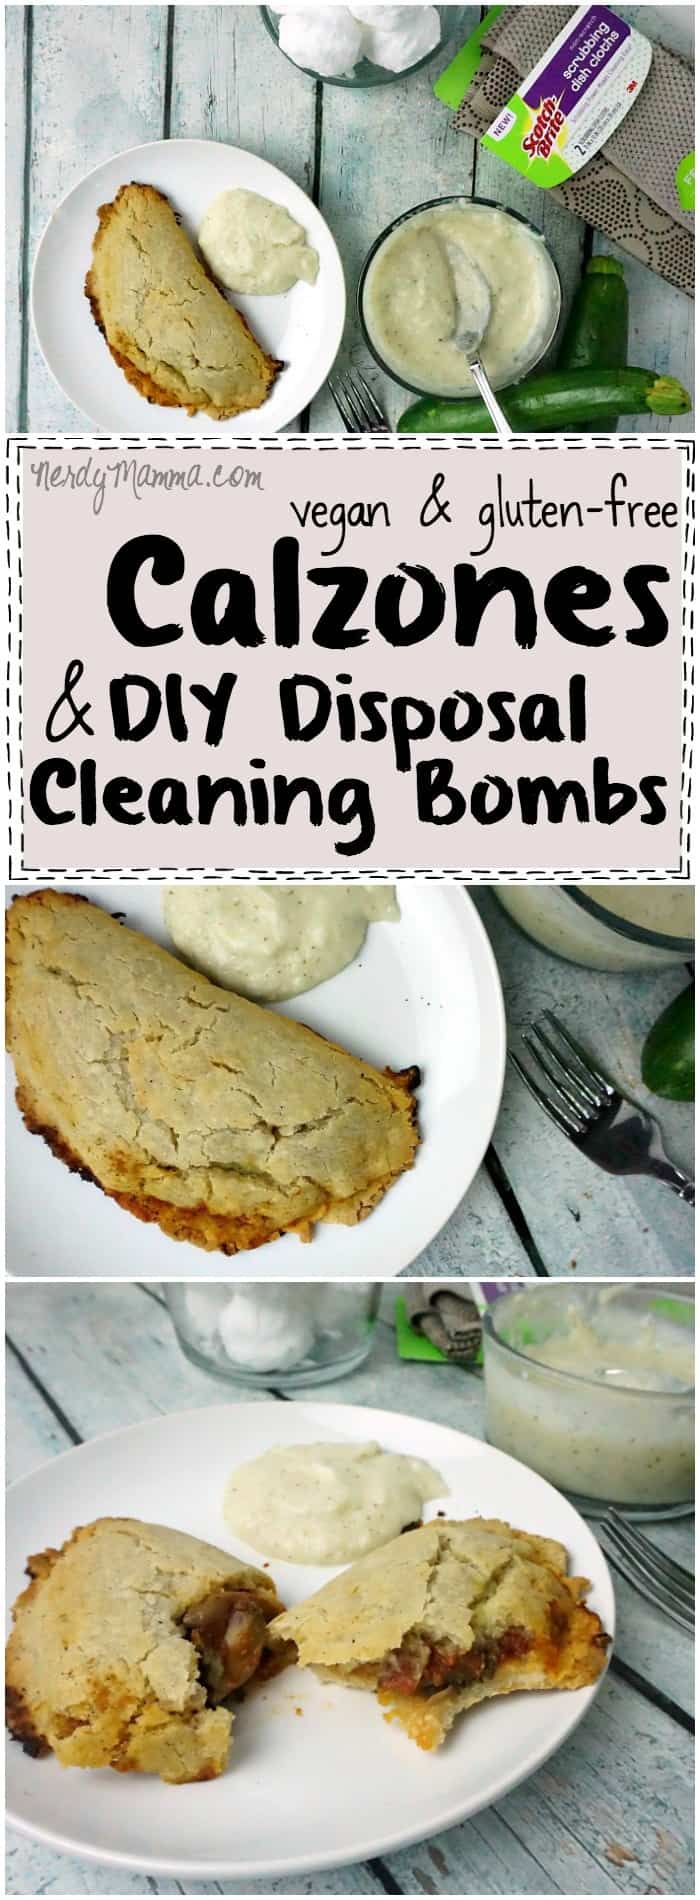 Mmmm...these vegan and gluten-free calzones sound awesome--and the idea of having a clean kitchen afterward Awesome.